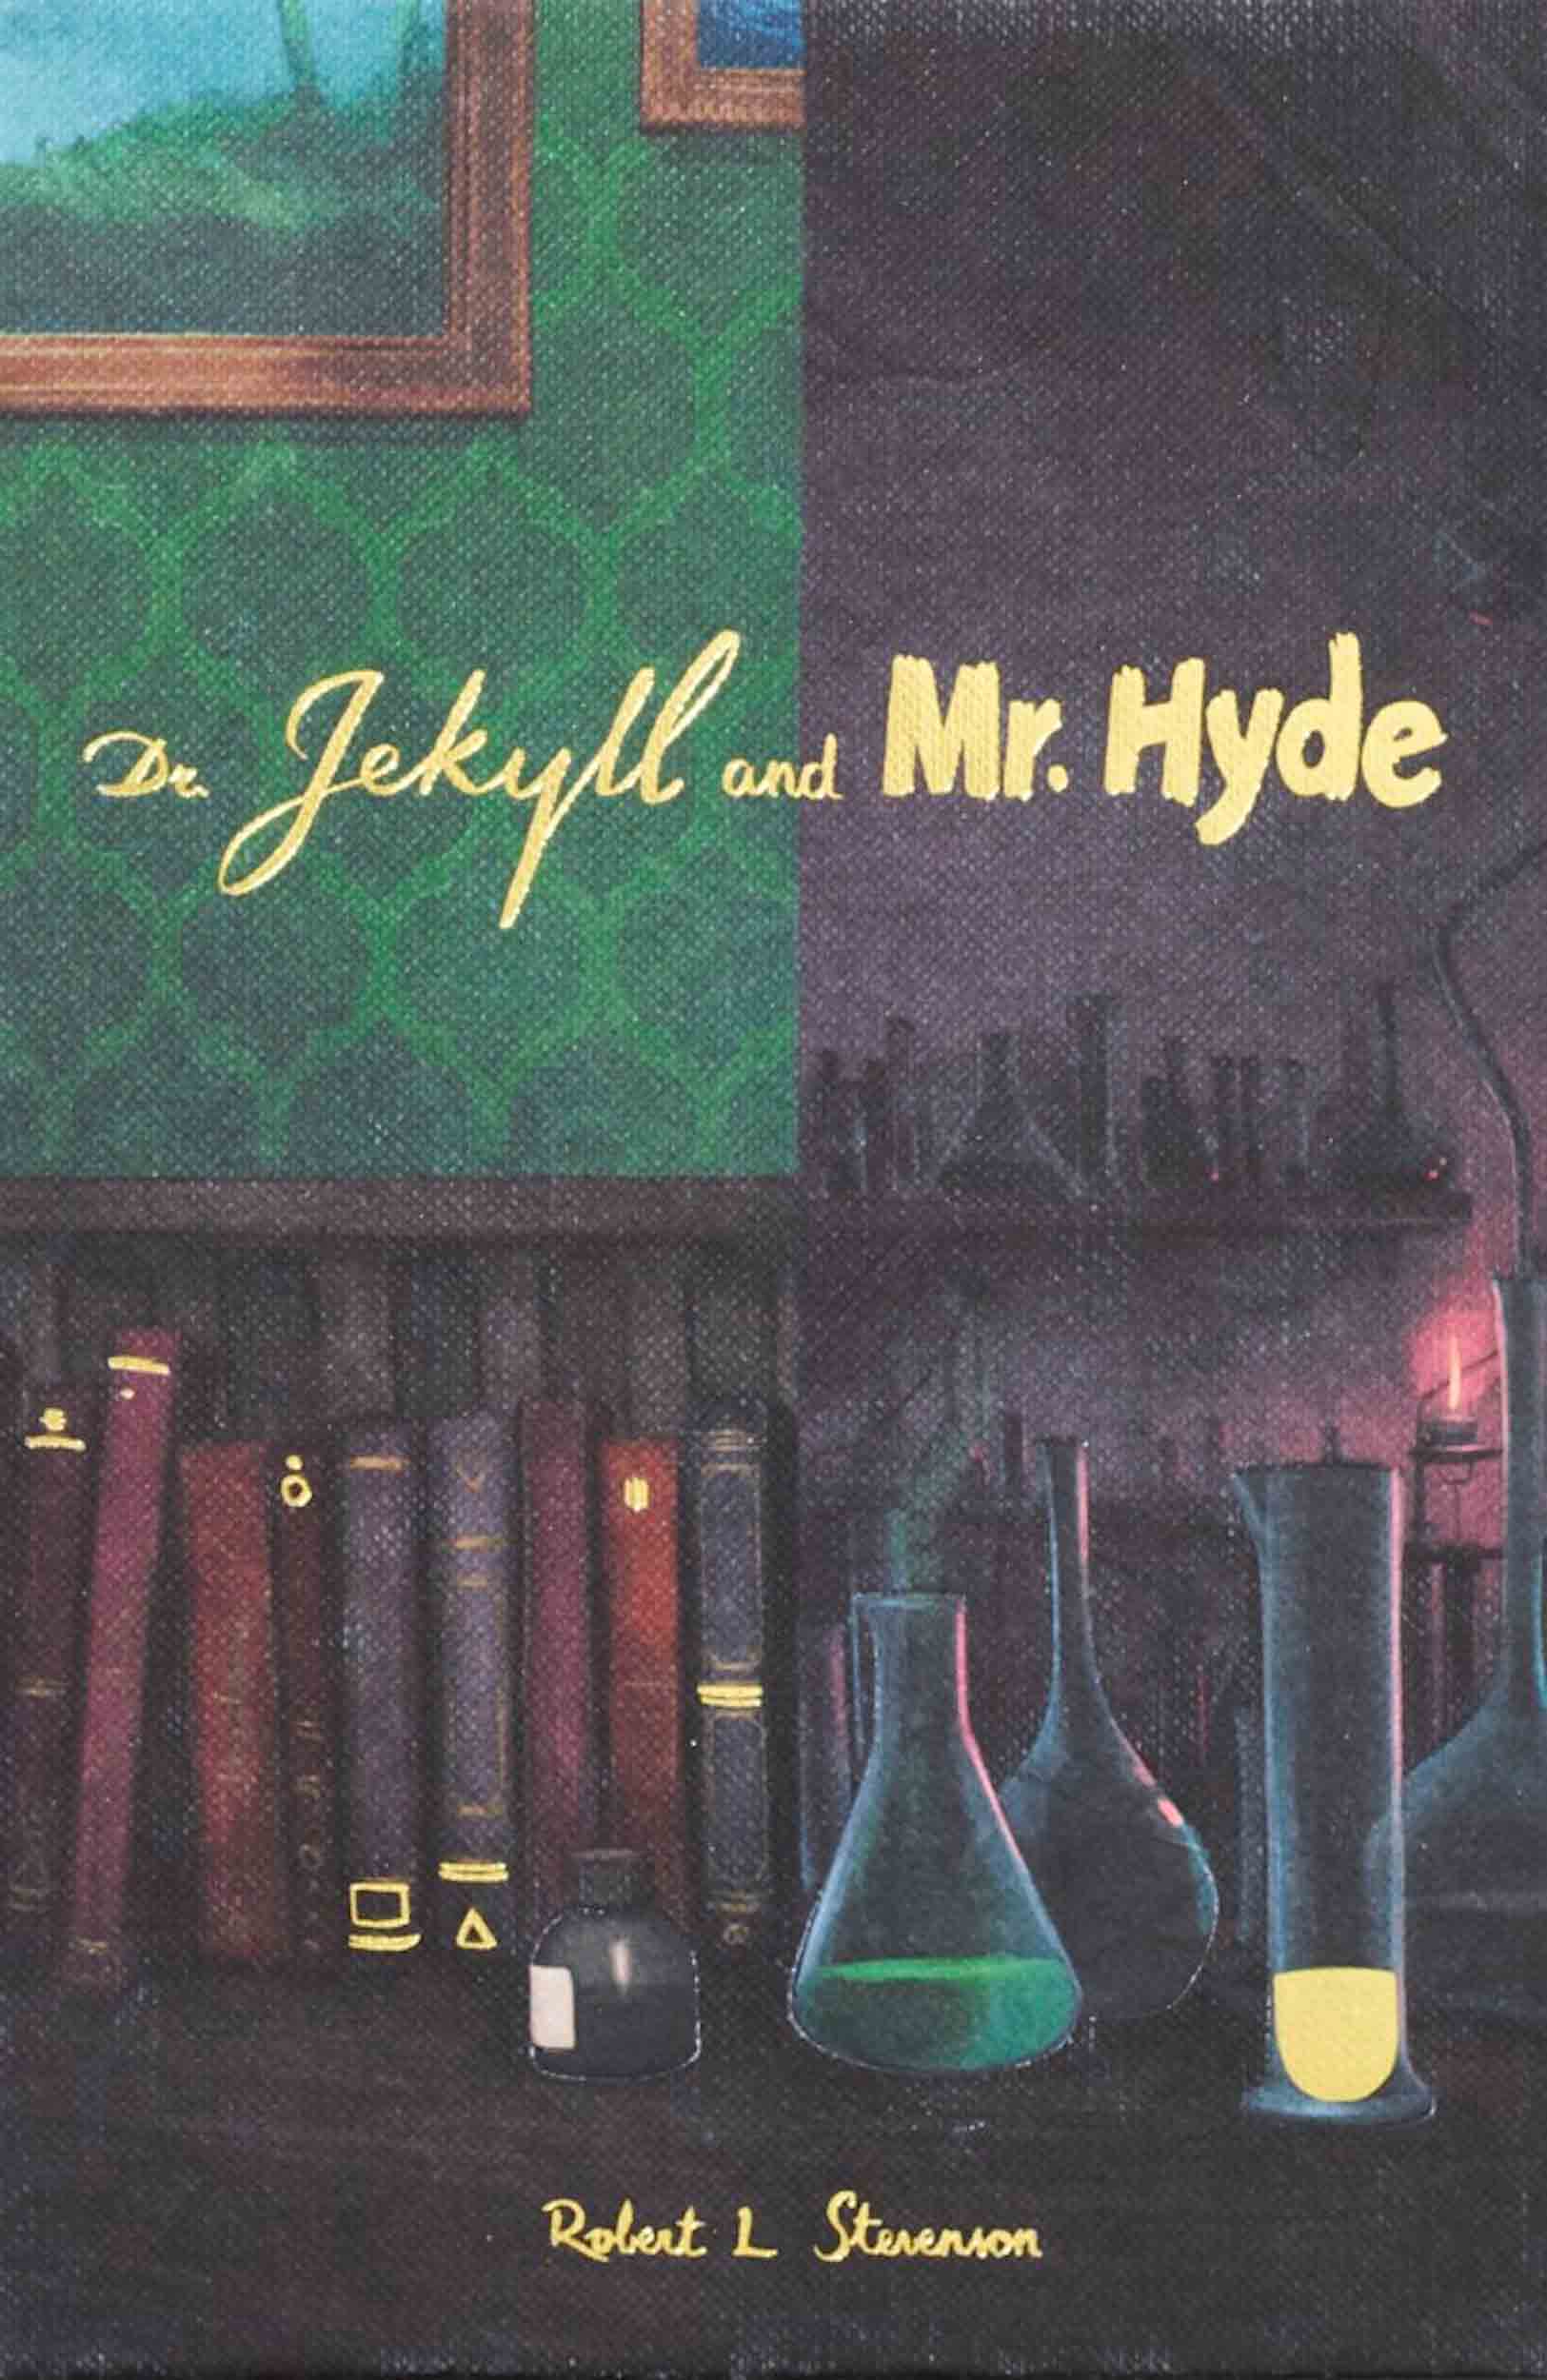 DR JEKYLL AND MR HYDE CE 